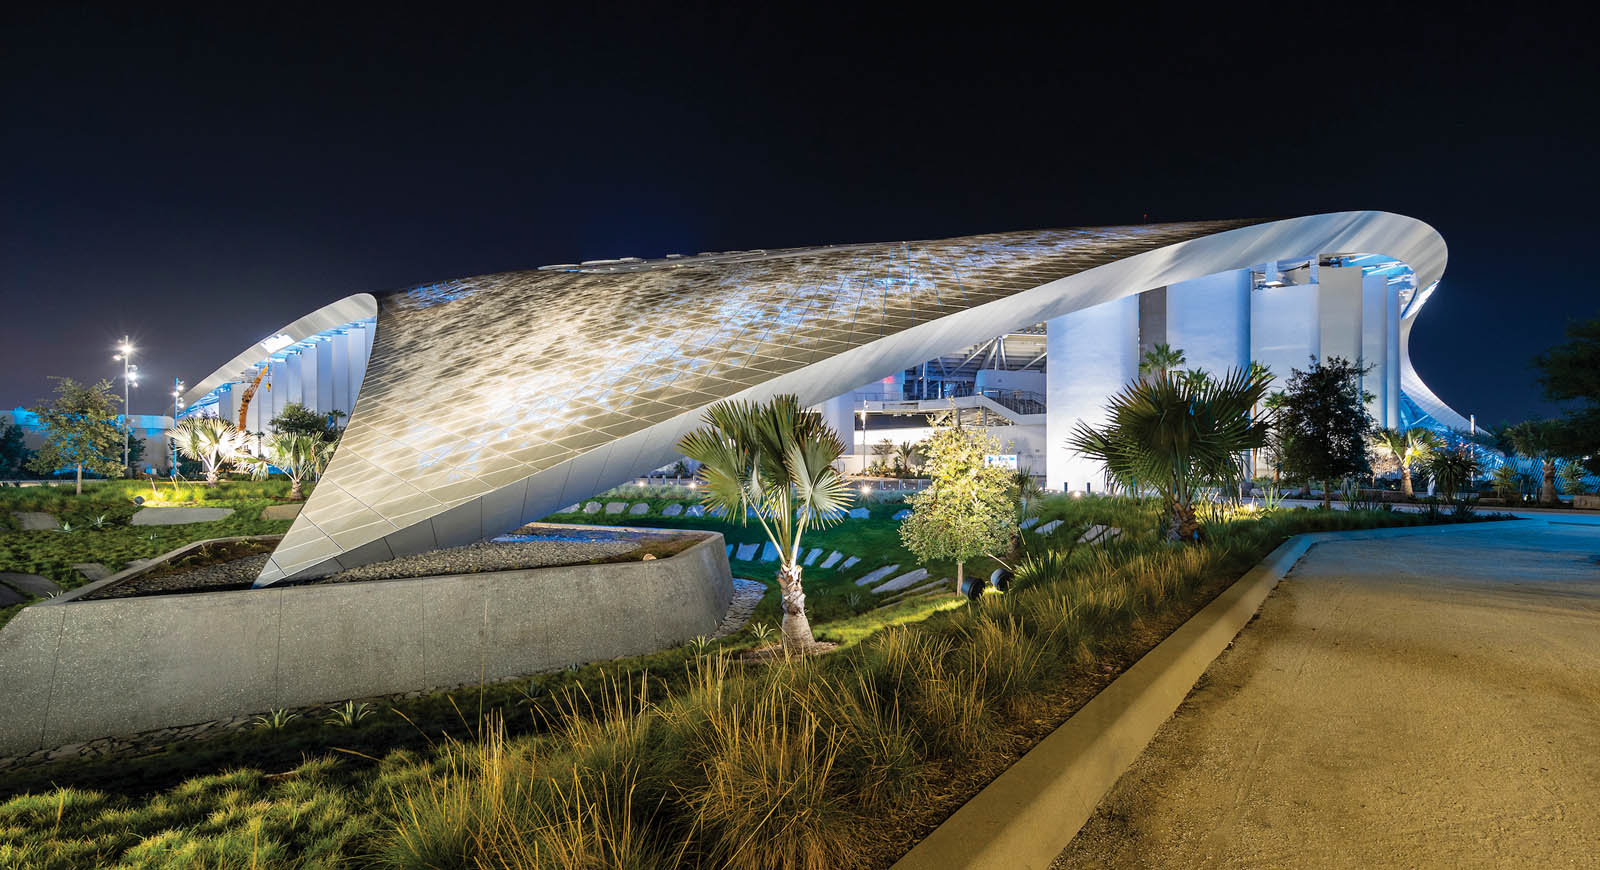 Architectural shading systems find new markets - Fabric Architecture  Magazine